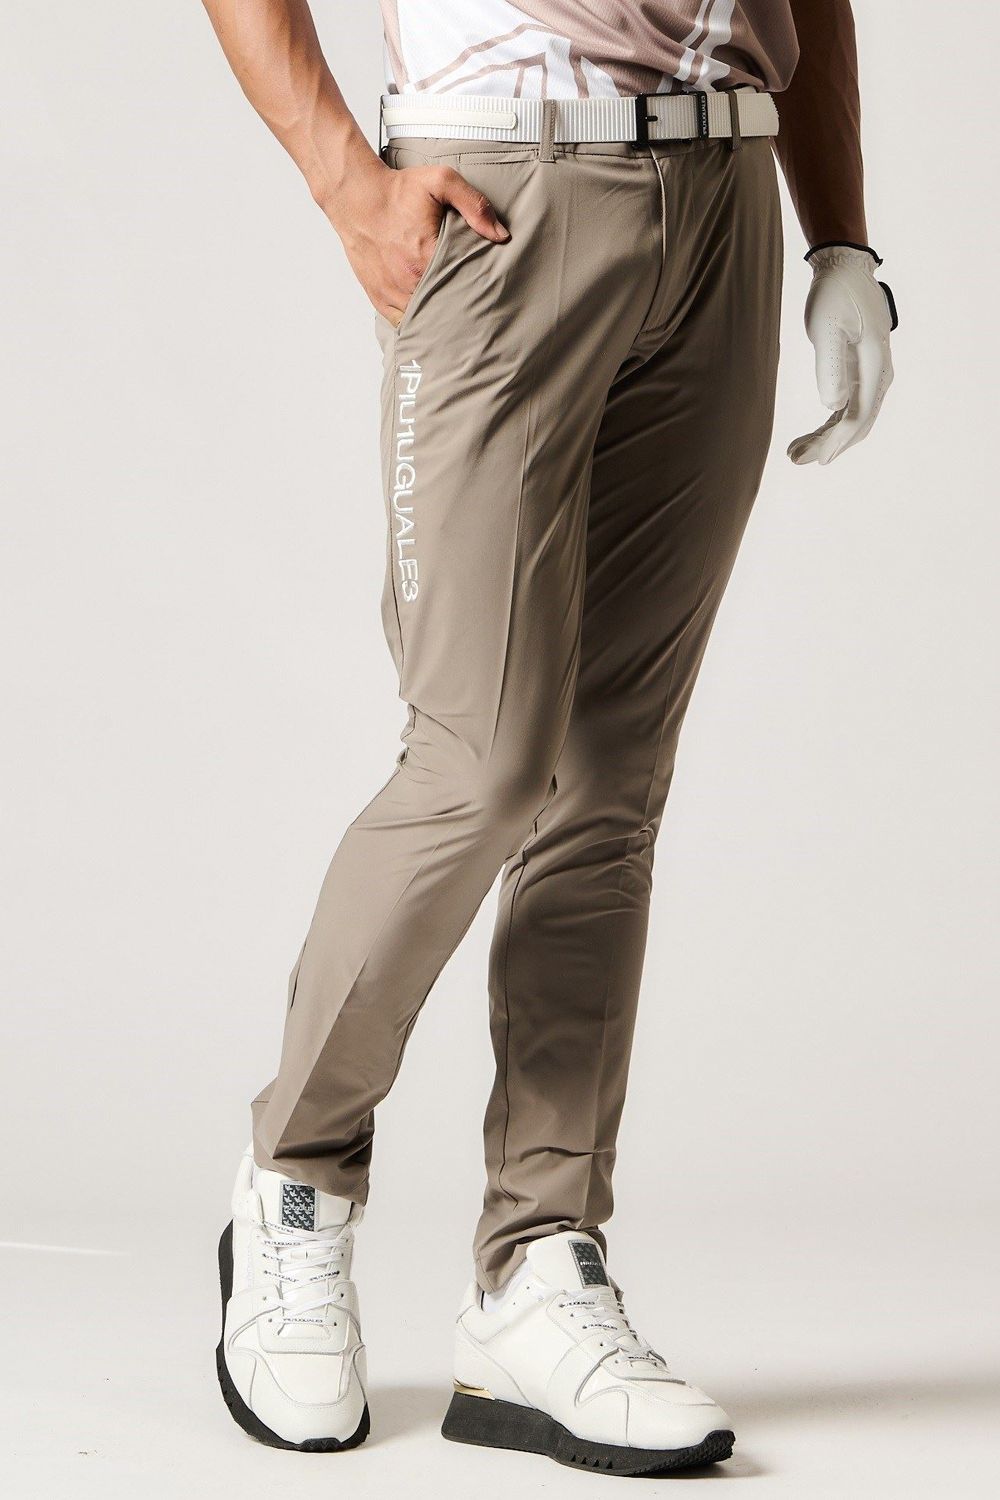 Men's Golf Pants - All In Motion™ Stone 30x30